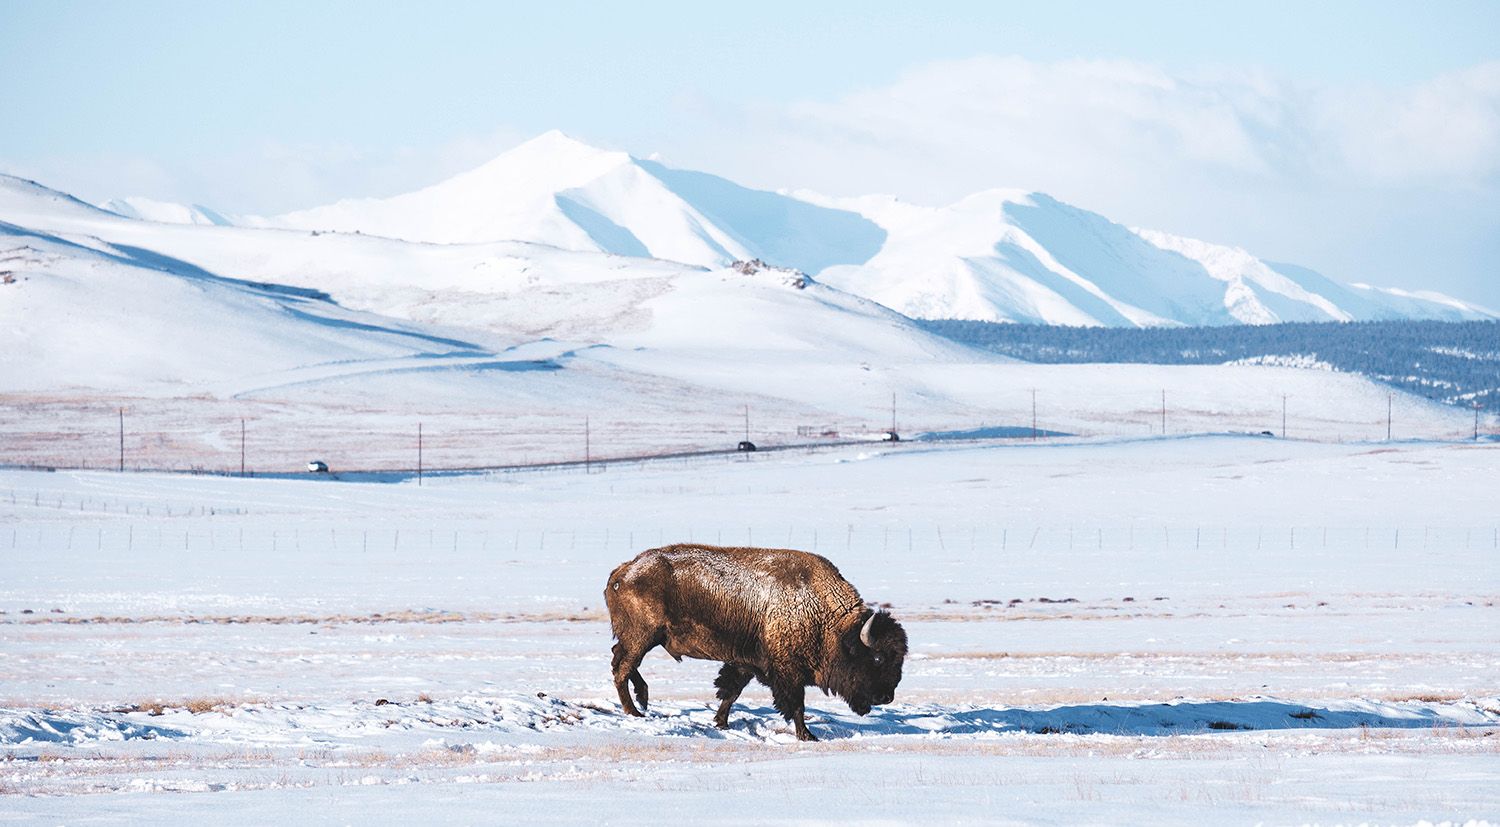 A side view of a bison grazing on a snow-covered field, with a fence, a road and snow-covered mountains in the background.